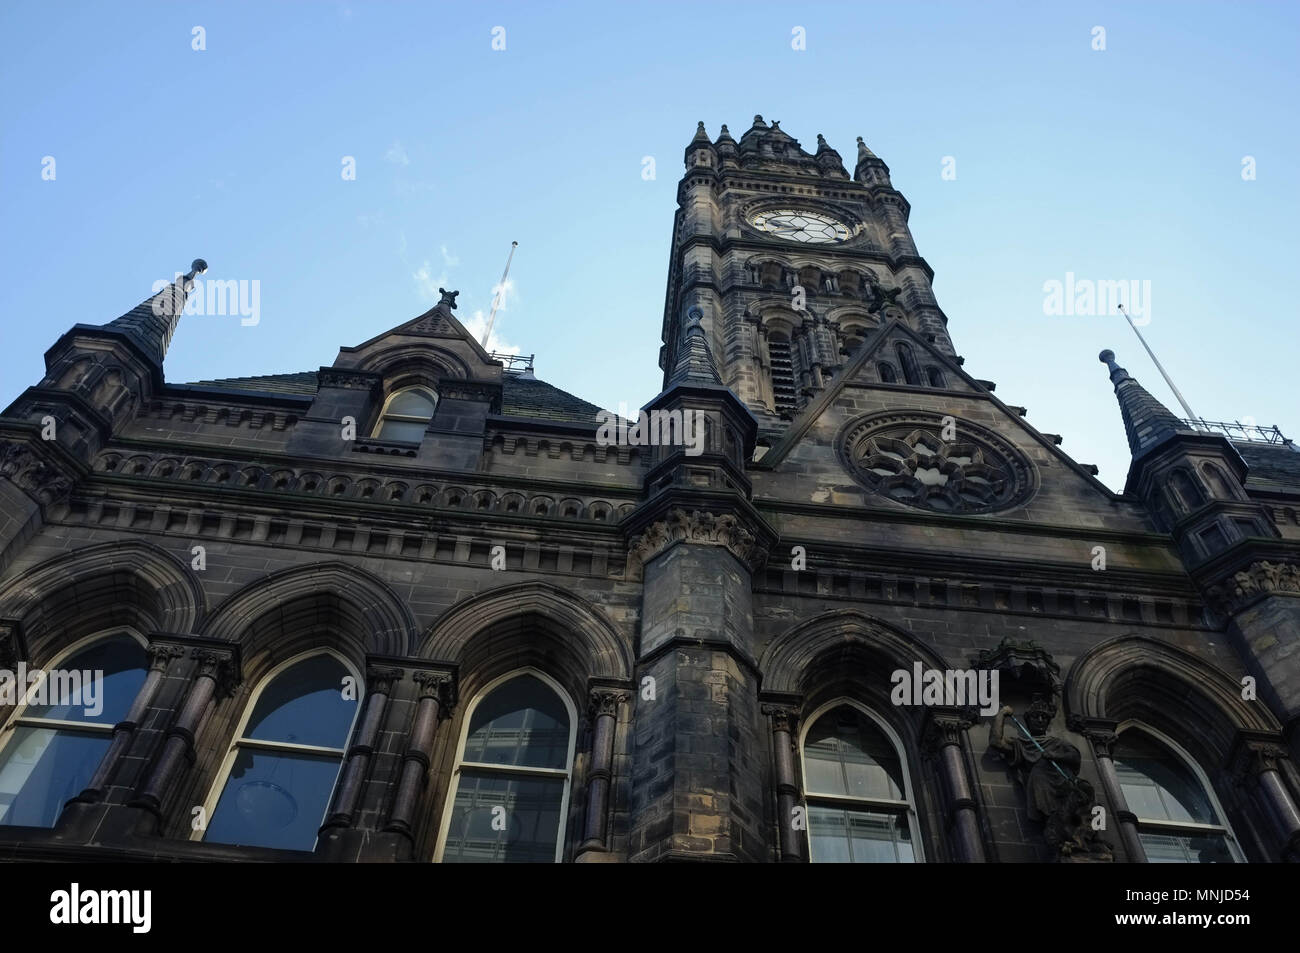 Middlesbrough Town Hall (built 1889, architect George Gordon Hoskins), Corporation Road, Middlesbrough, England, UK, May 2018 Stock Photo